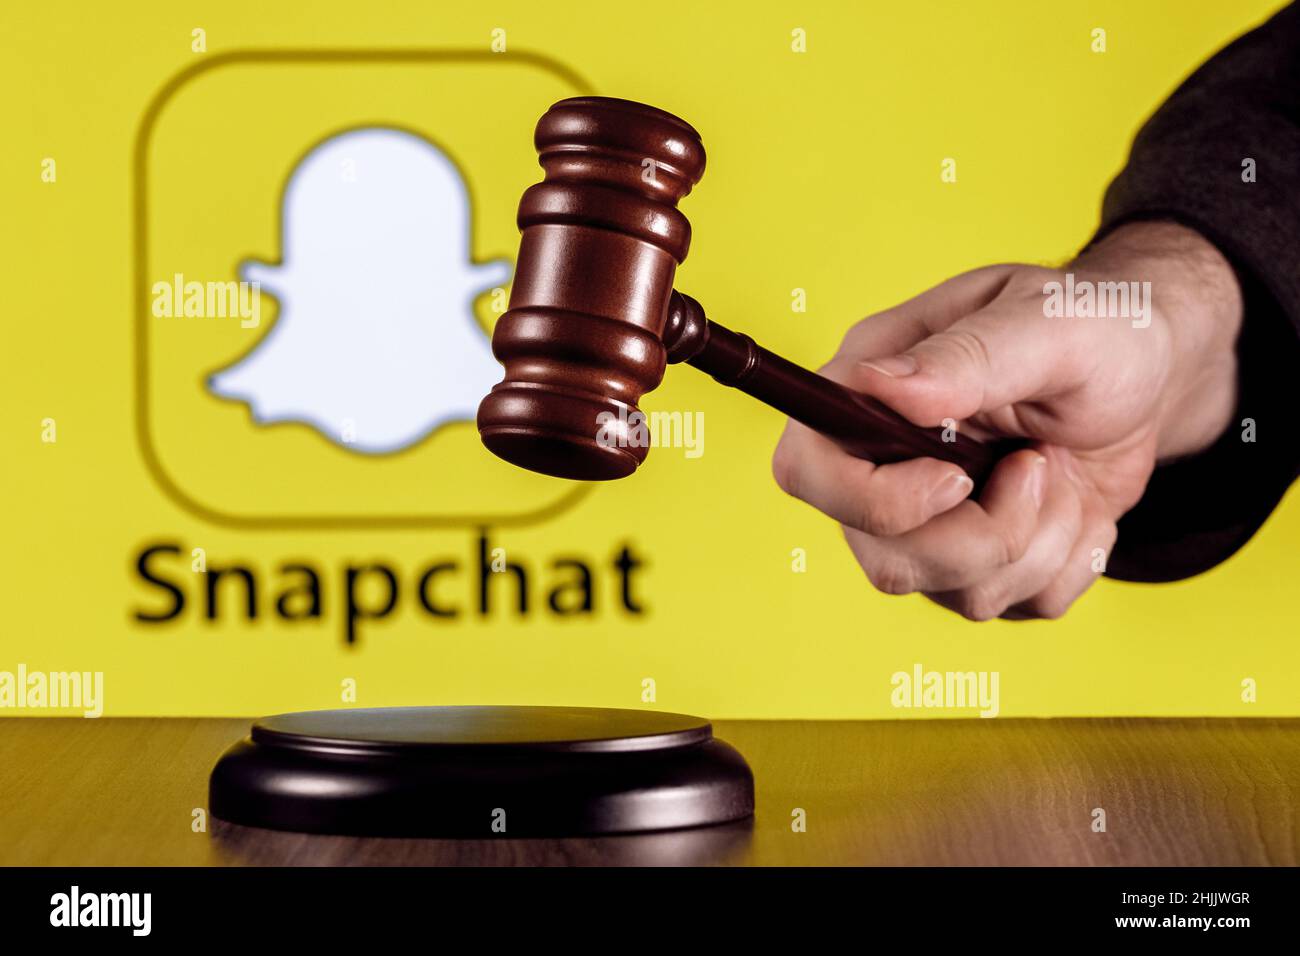 Gavel in hand against the background of Snapchat instant messaging service logo. The concept of the trial. Stock Photo